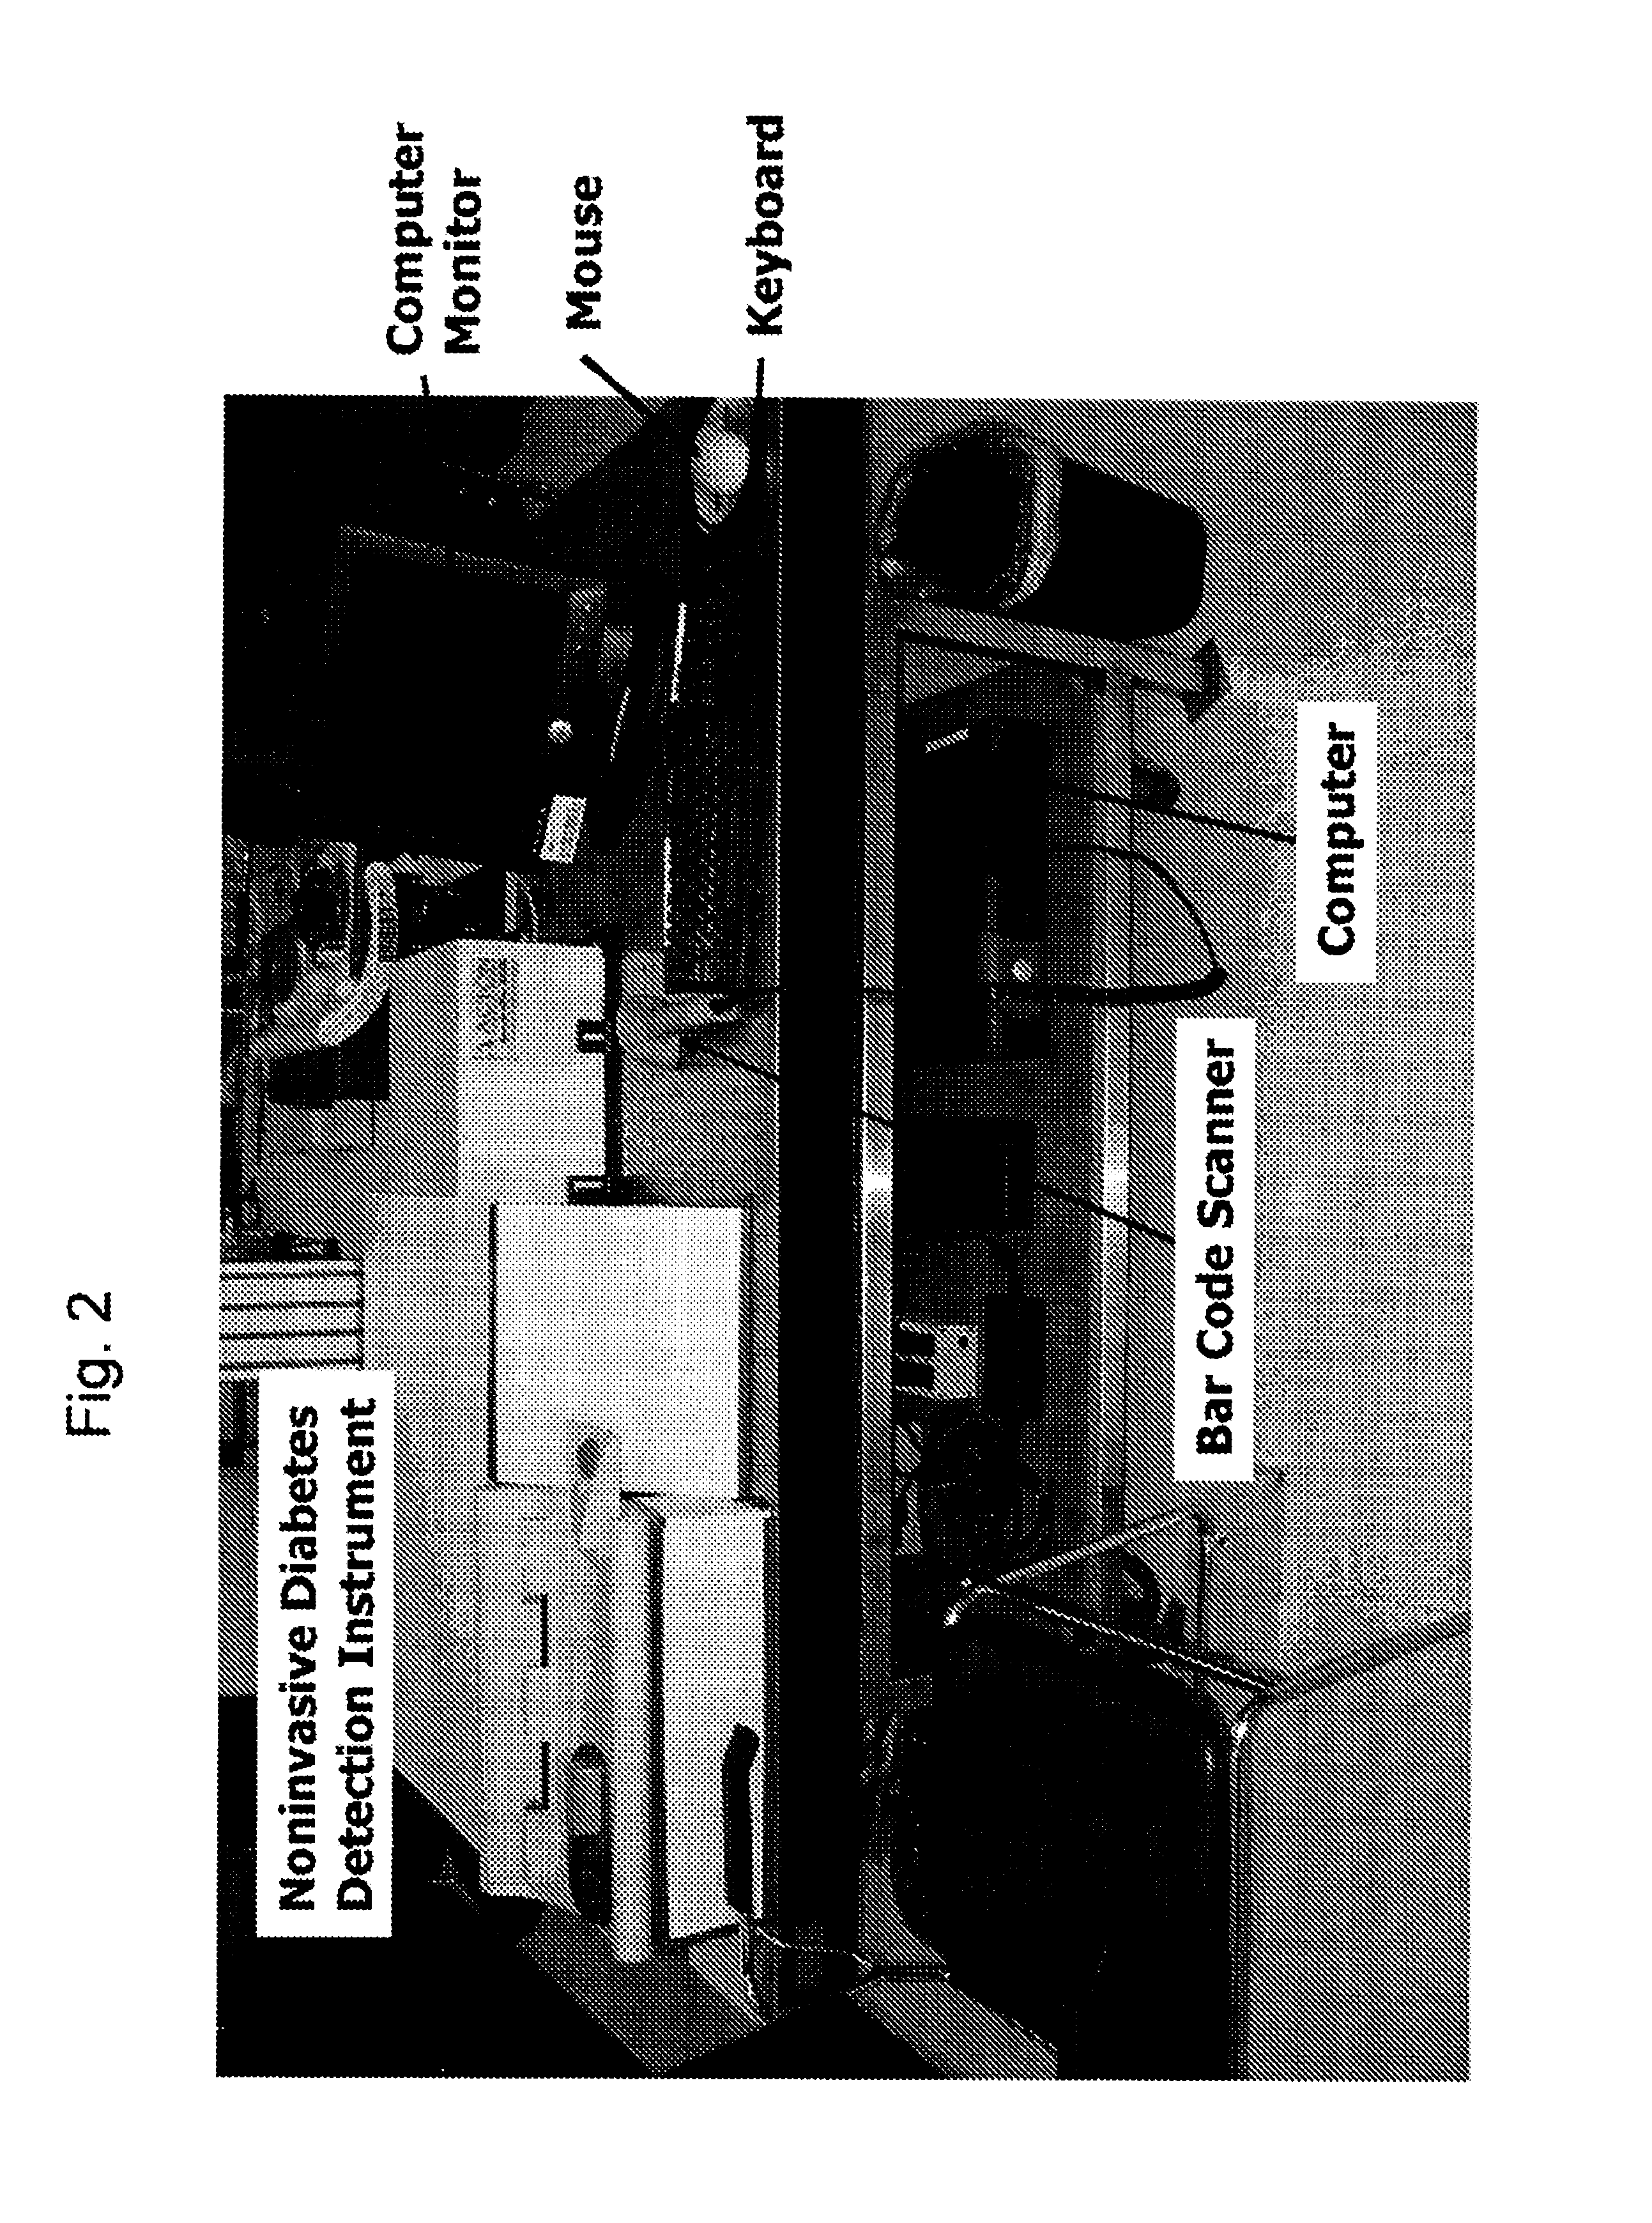 Method and Apparatus for Determination of a Measure of a Glycation End-Product or Disease State Using Tissue Fluorescence